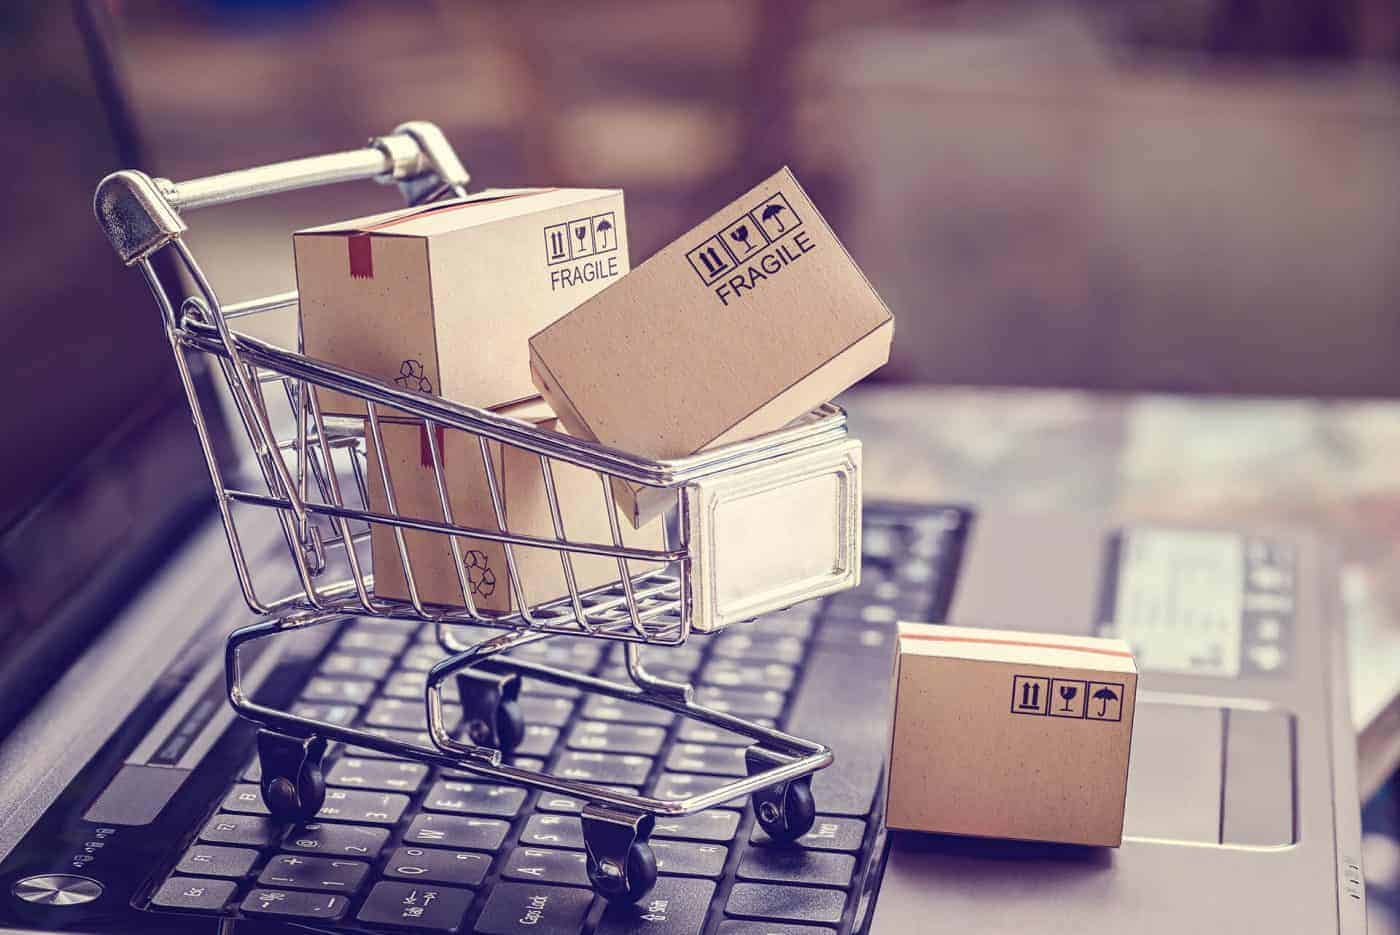 E-commerce bring the gap between expectation and reality in ecommerce